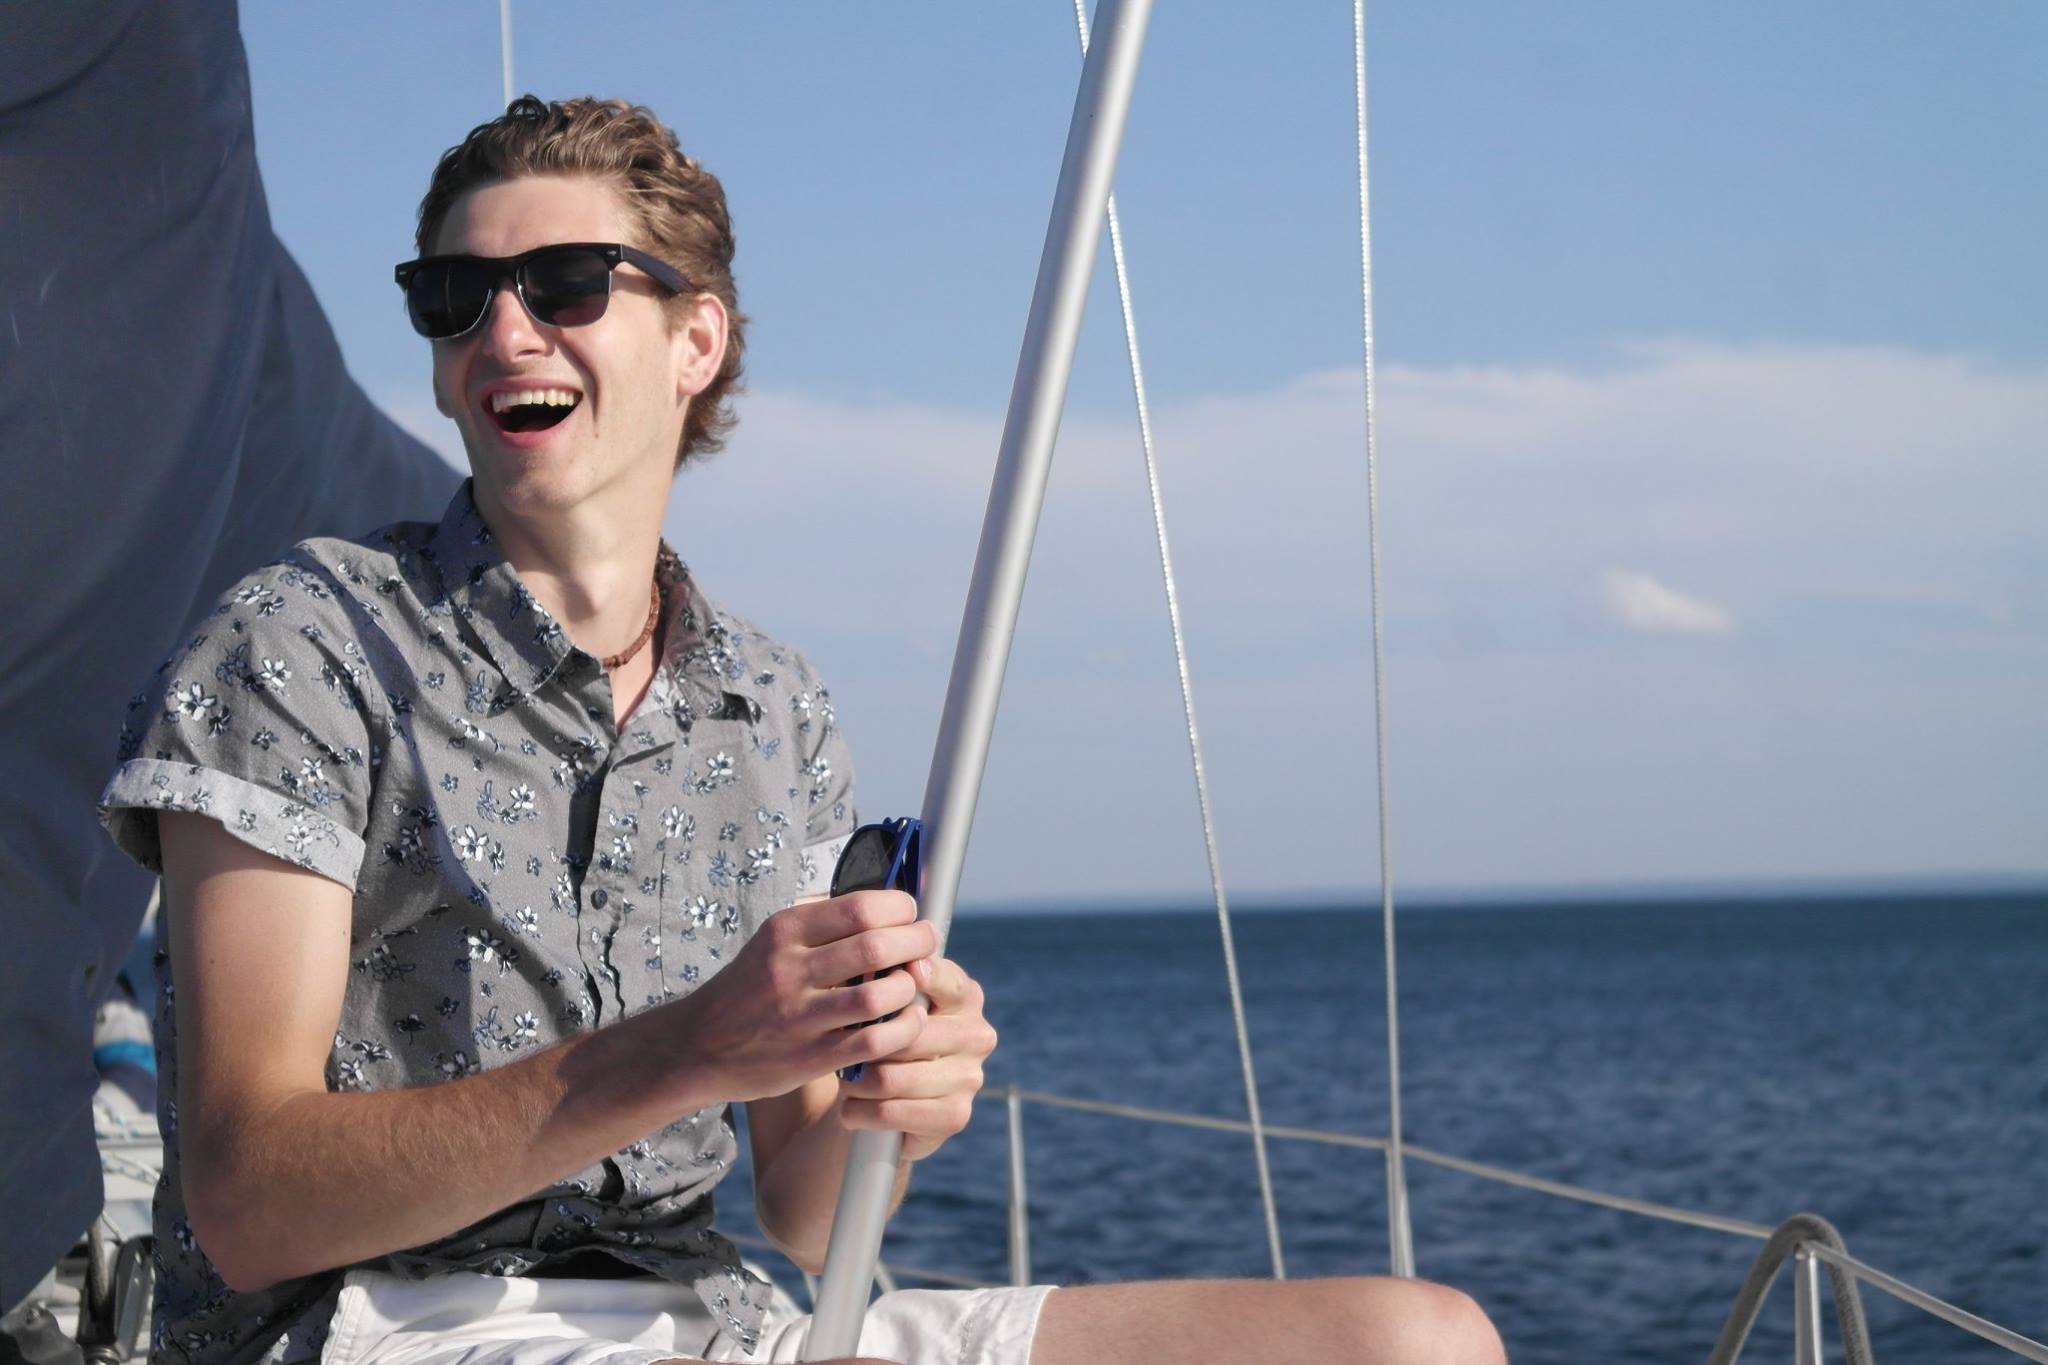 Man smiling on a boat